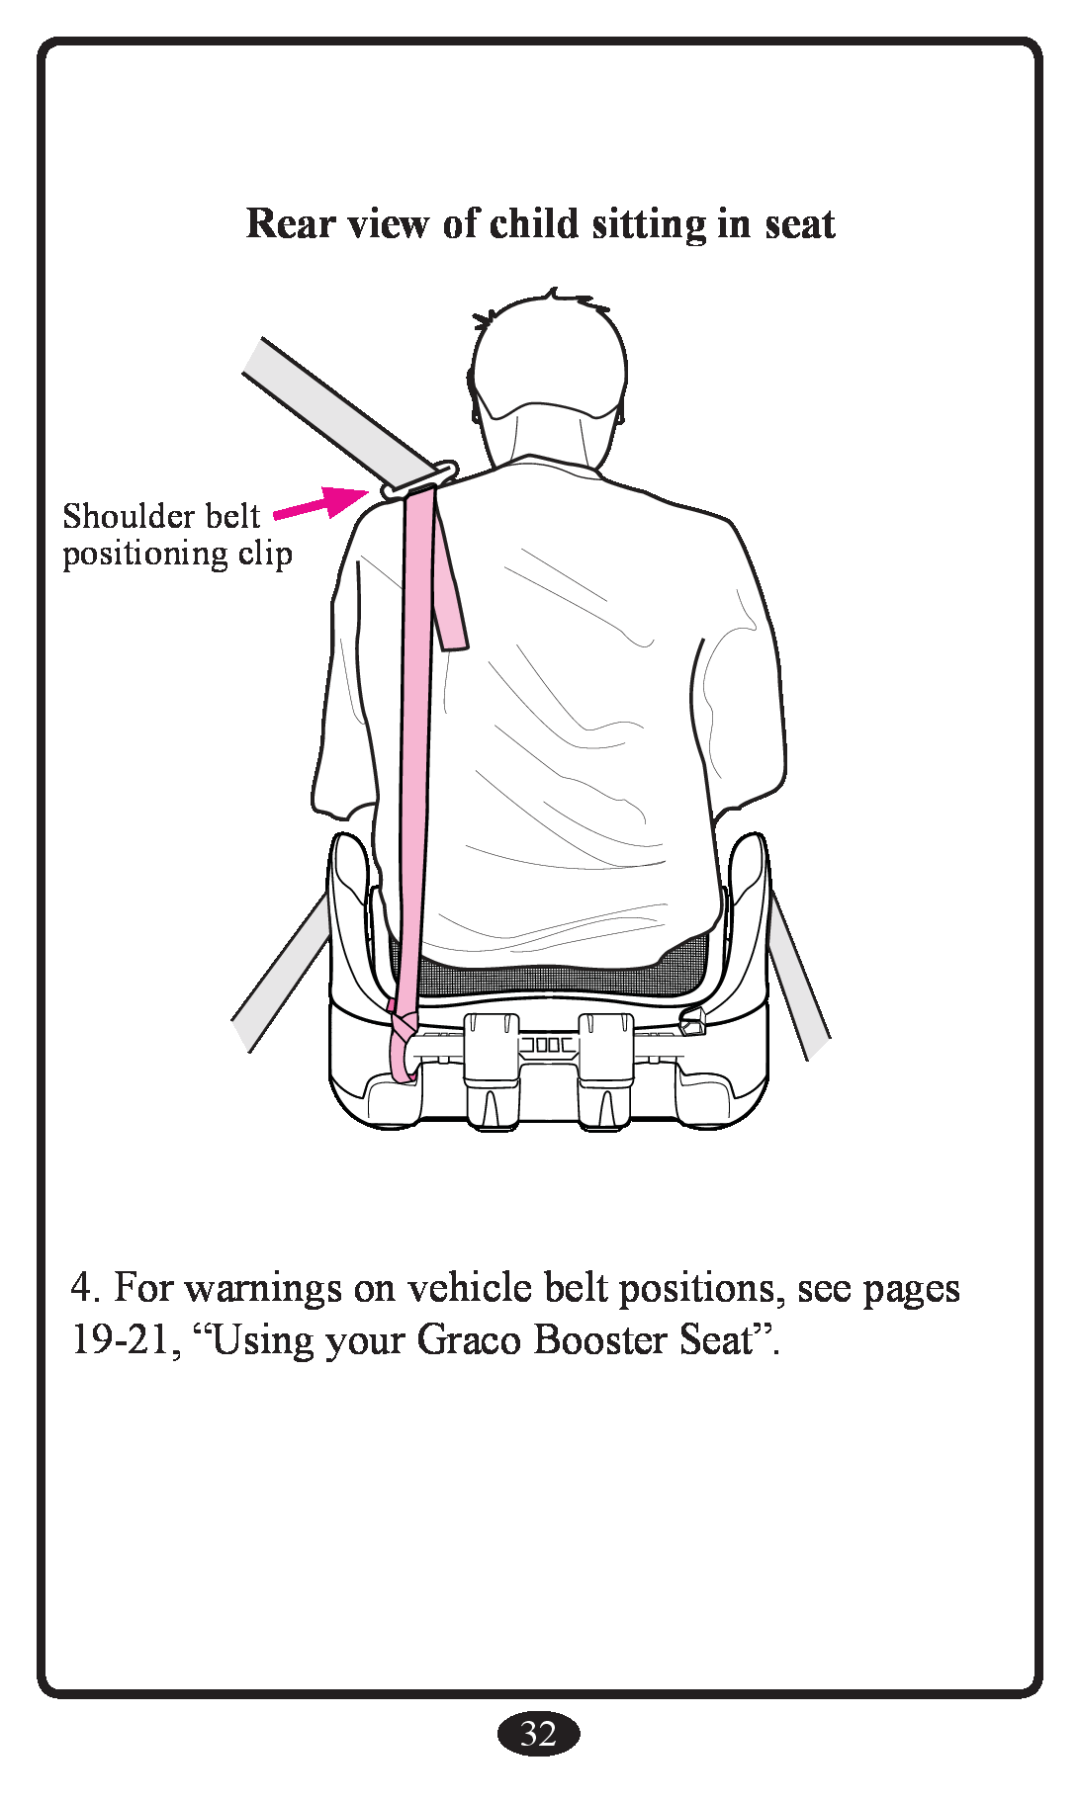 Graco Booster Seat owner manual Rear view of child sitting in seat, For warnings on vehicle belt positions, see pages 